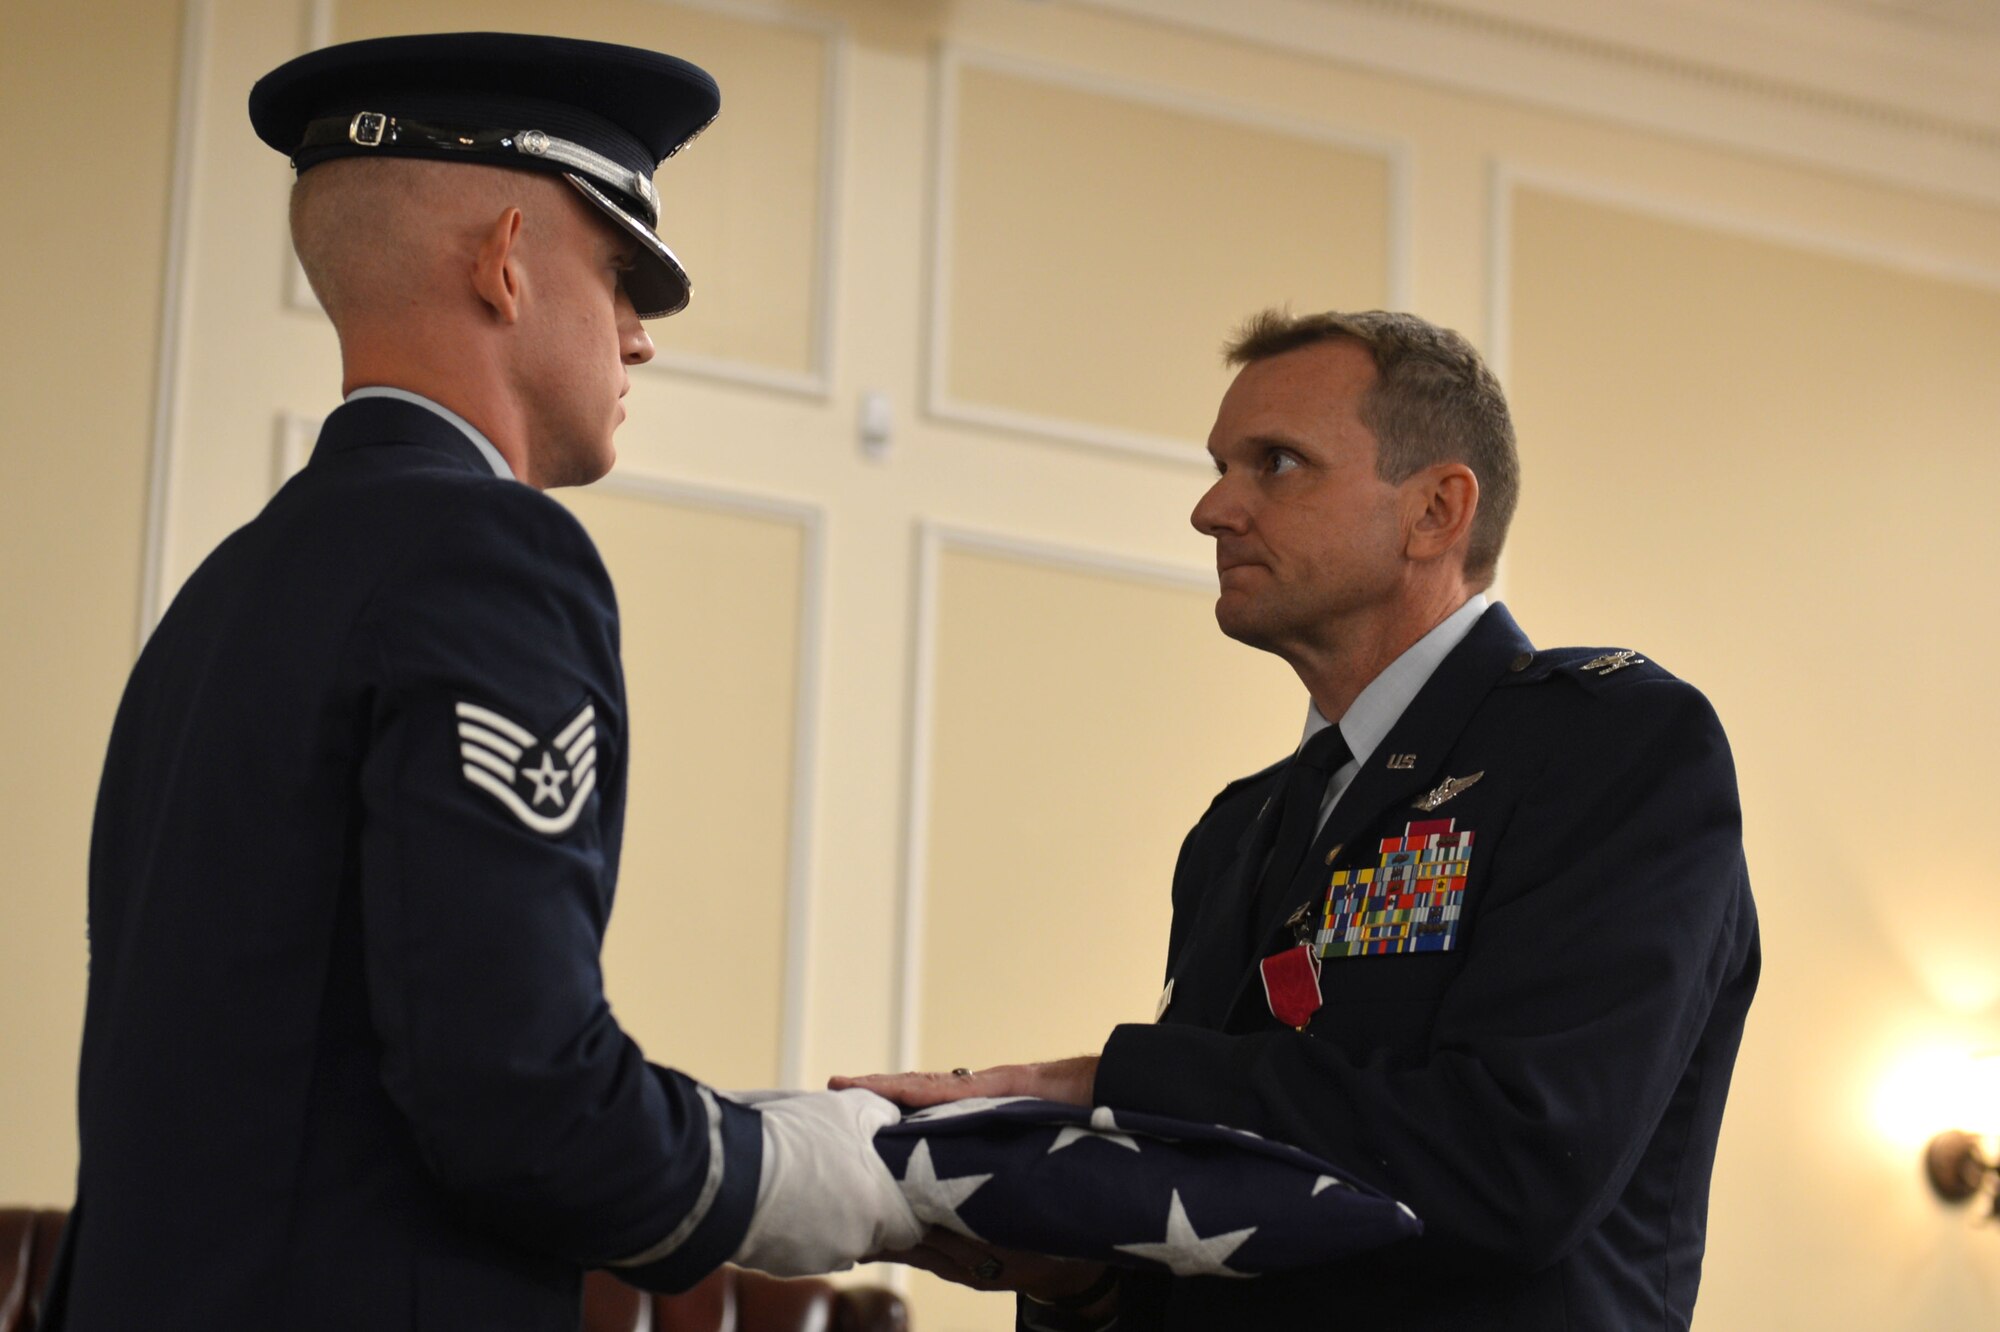 U.S. Air Force Col. Dustin P. Smith,right, Headquarters U.S. Air Forces Central Command chief of staff, receives a flag from the Team Shaw Honor Guard during his retirement ceremony, July 14, 2017, Shaw Air Force Base, S.C. Smith was a senior air battle manager with 1,800 flight hours in the NATO E-3A and E-3 B/C aircraft. (U.S. Air Force photo by Senior Airman Christopher Maldonado)